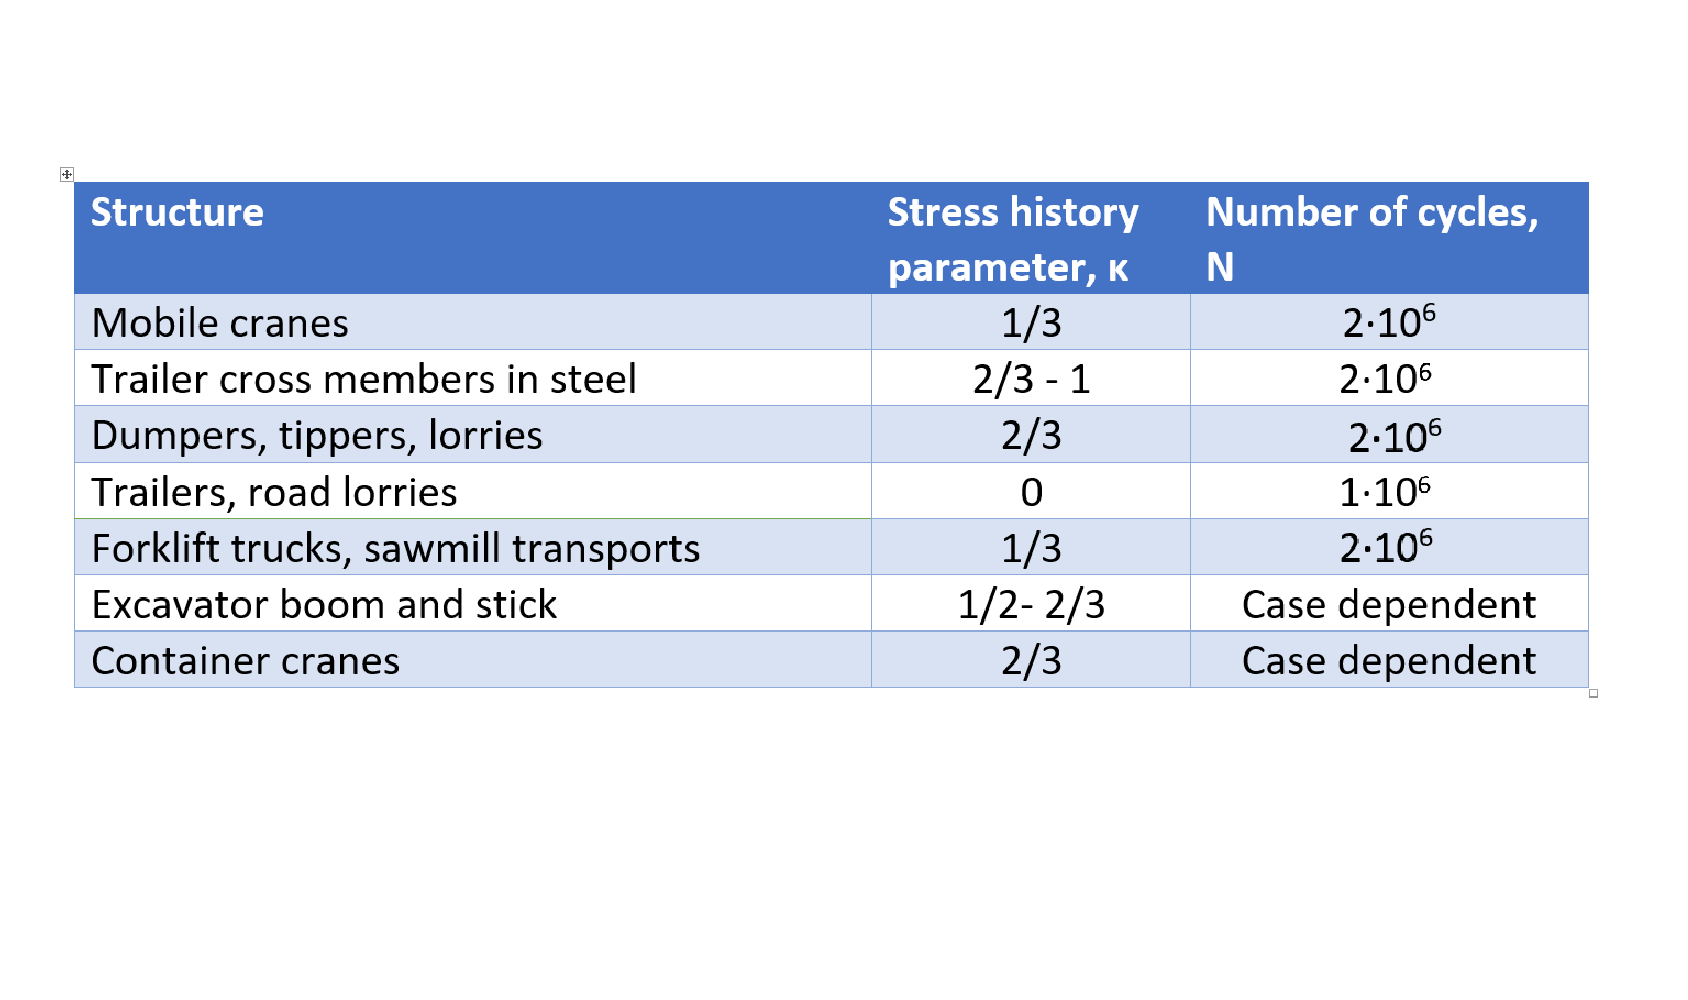 Picture 3: Typified stress histories and corresponding stress history parameter.